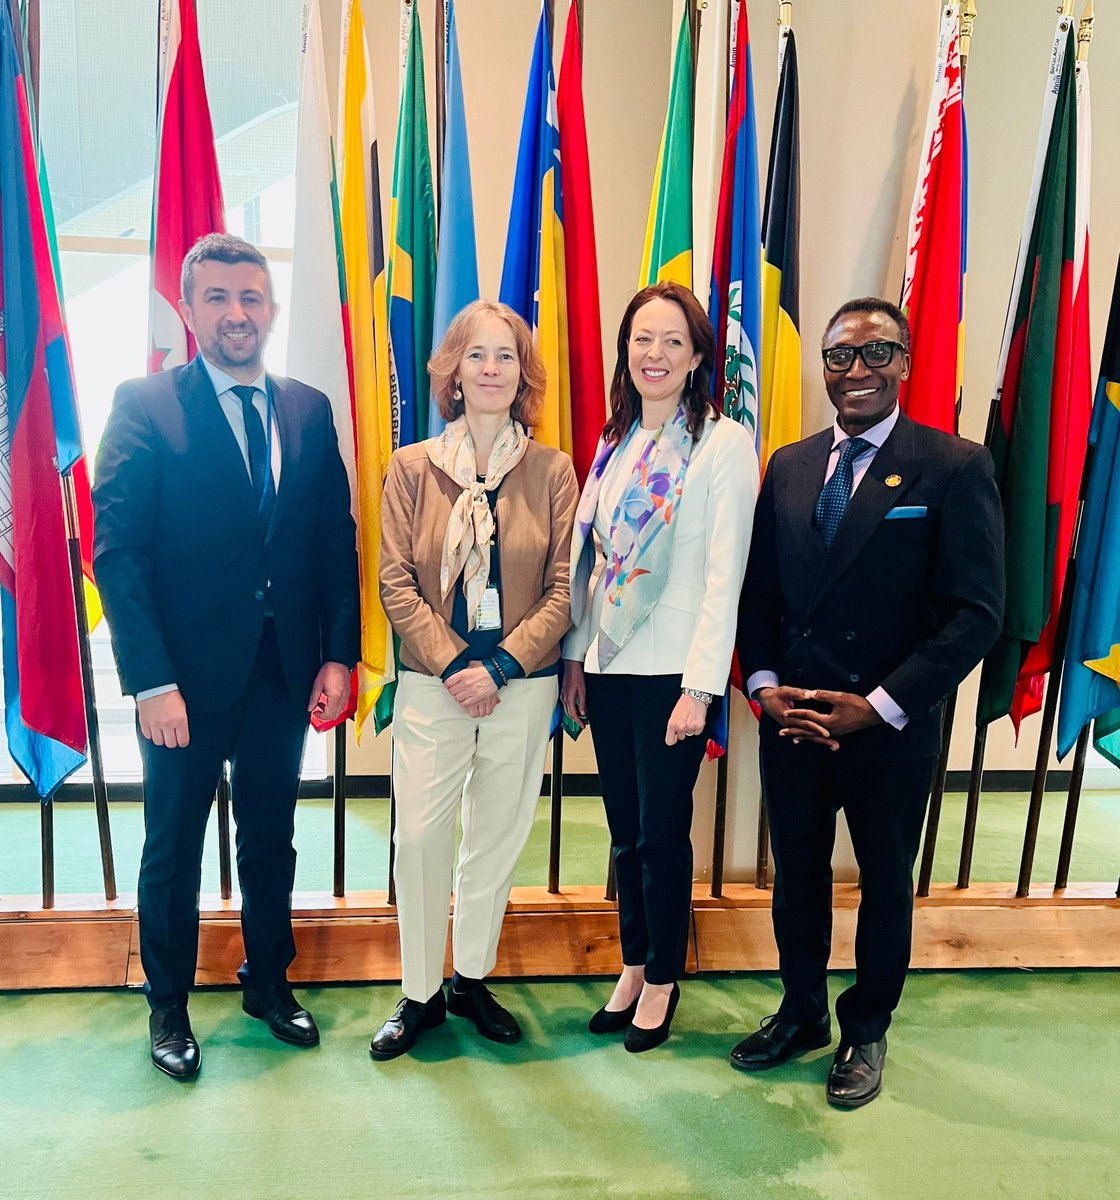 Great conversation with Minister Dubravka Bosnjak @MCP_BiH 🇧🇦 at #CPD57! Kudos on #DemographicResilience efforts, such as the #Youth Strategy. Hope to see BiH's insights shared at Portugal DemRes Conference! 
@UNFPABiH @mosotiUNFPA